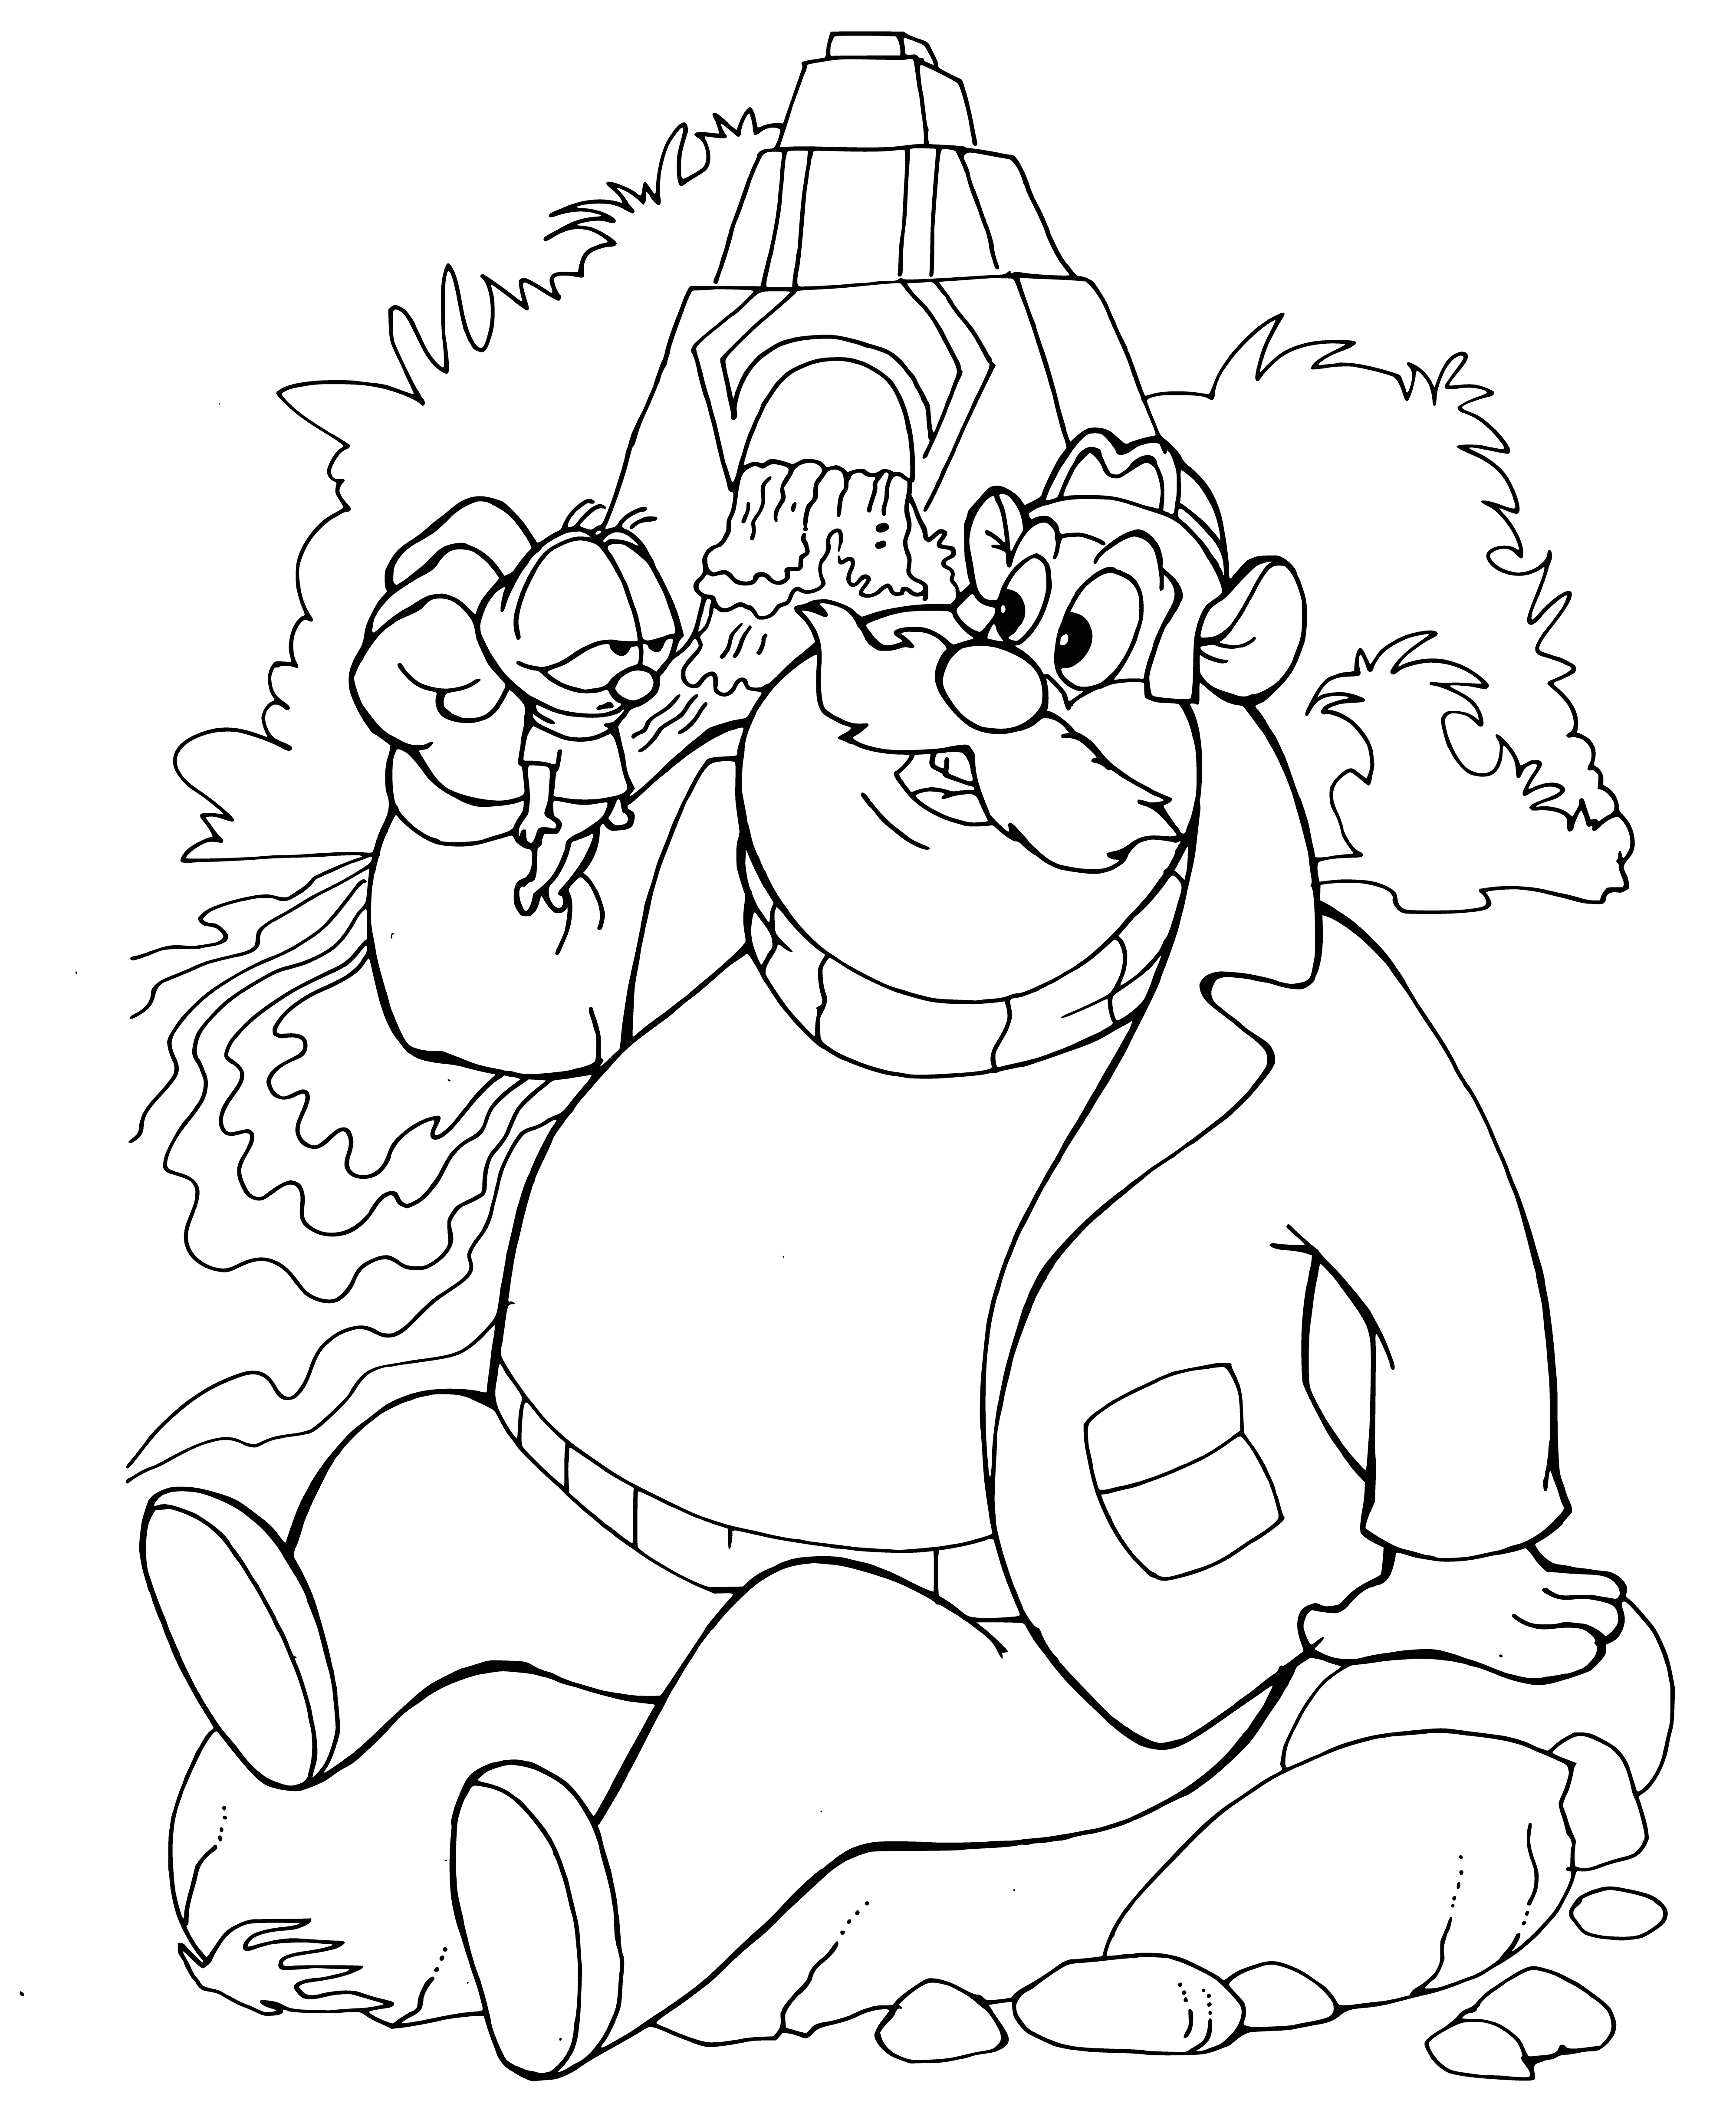 Roquefort and Vzhik coloring page